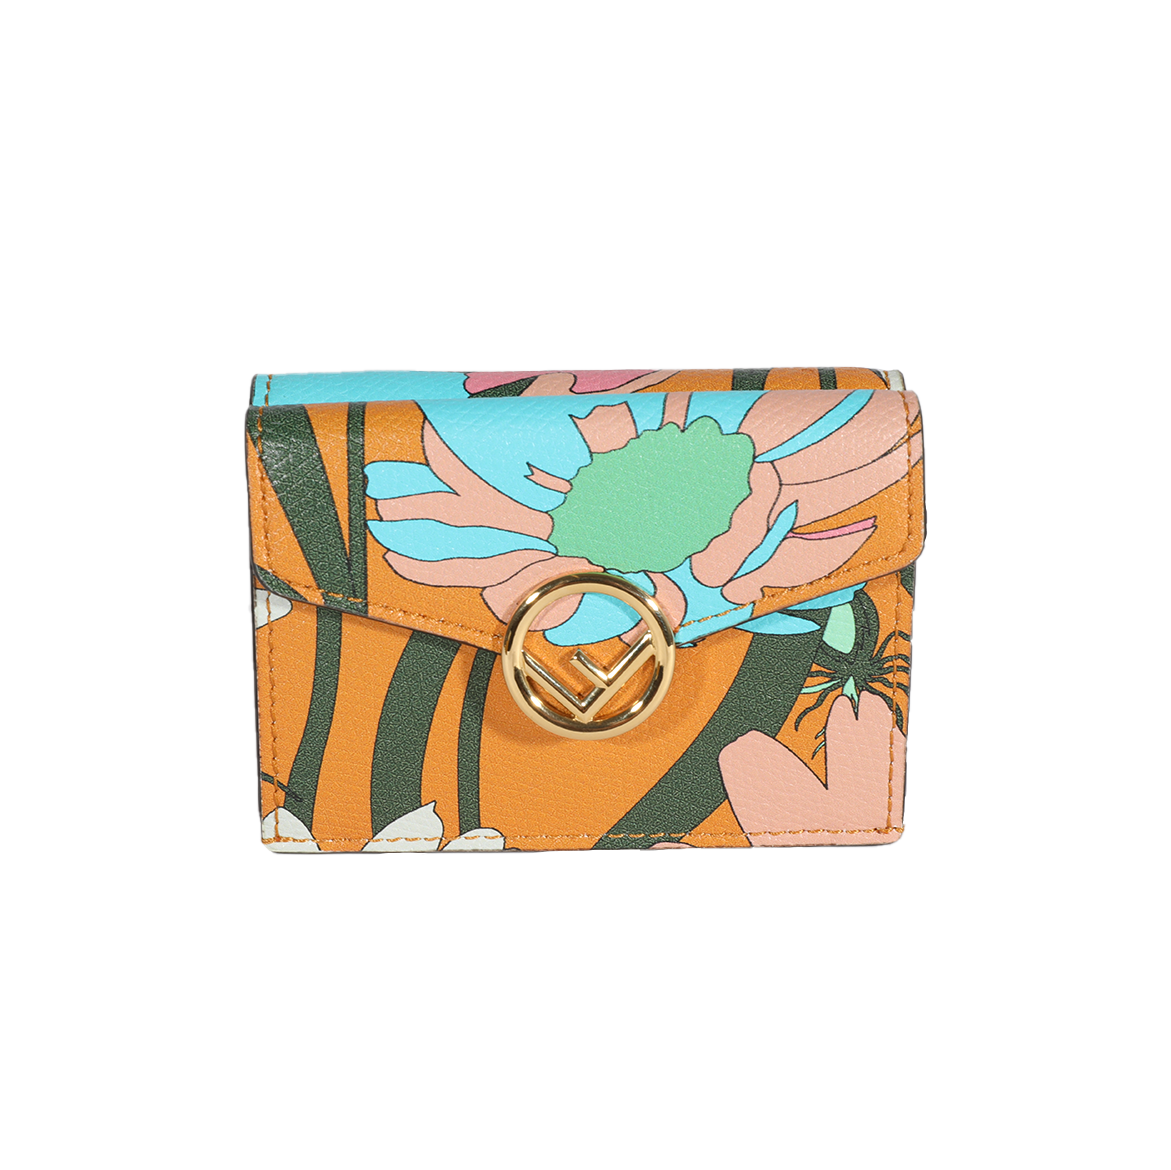 Fendi Multicolor Floral Printed Leather Micro Trifold Wallet